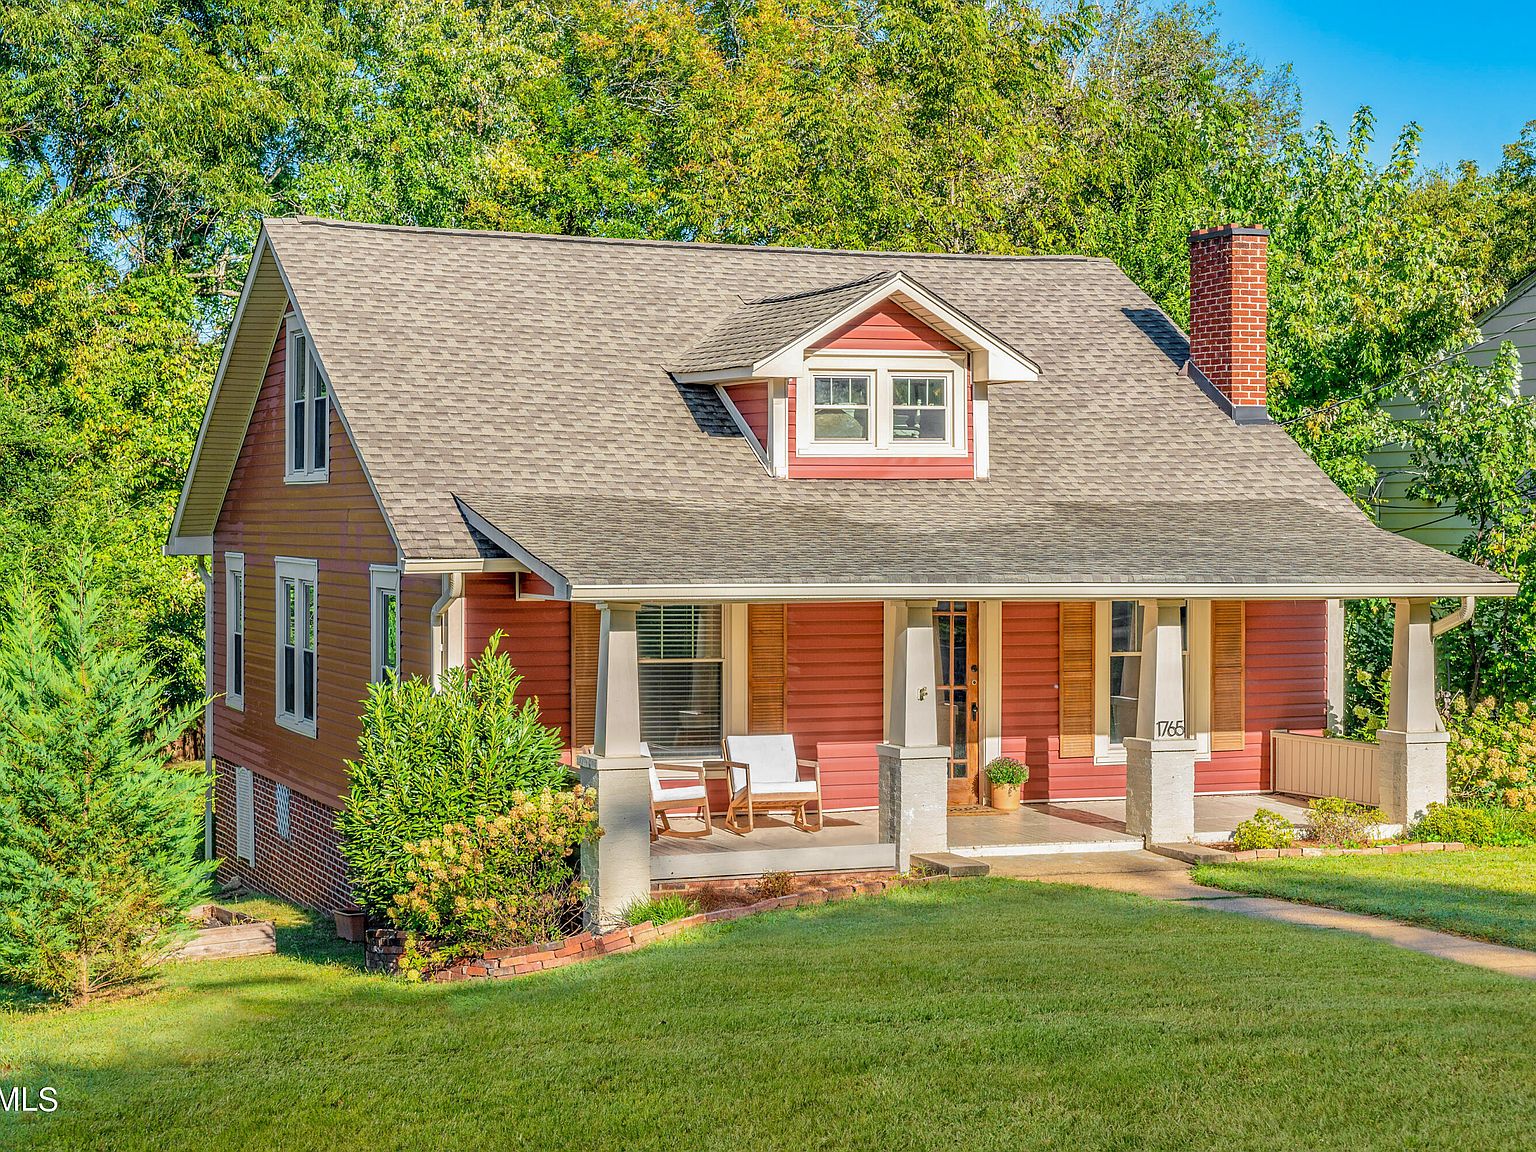 1765 Harle Ave NW, Cleveland, TN 37311 Zillow